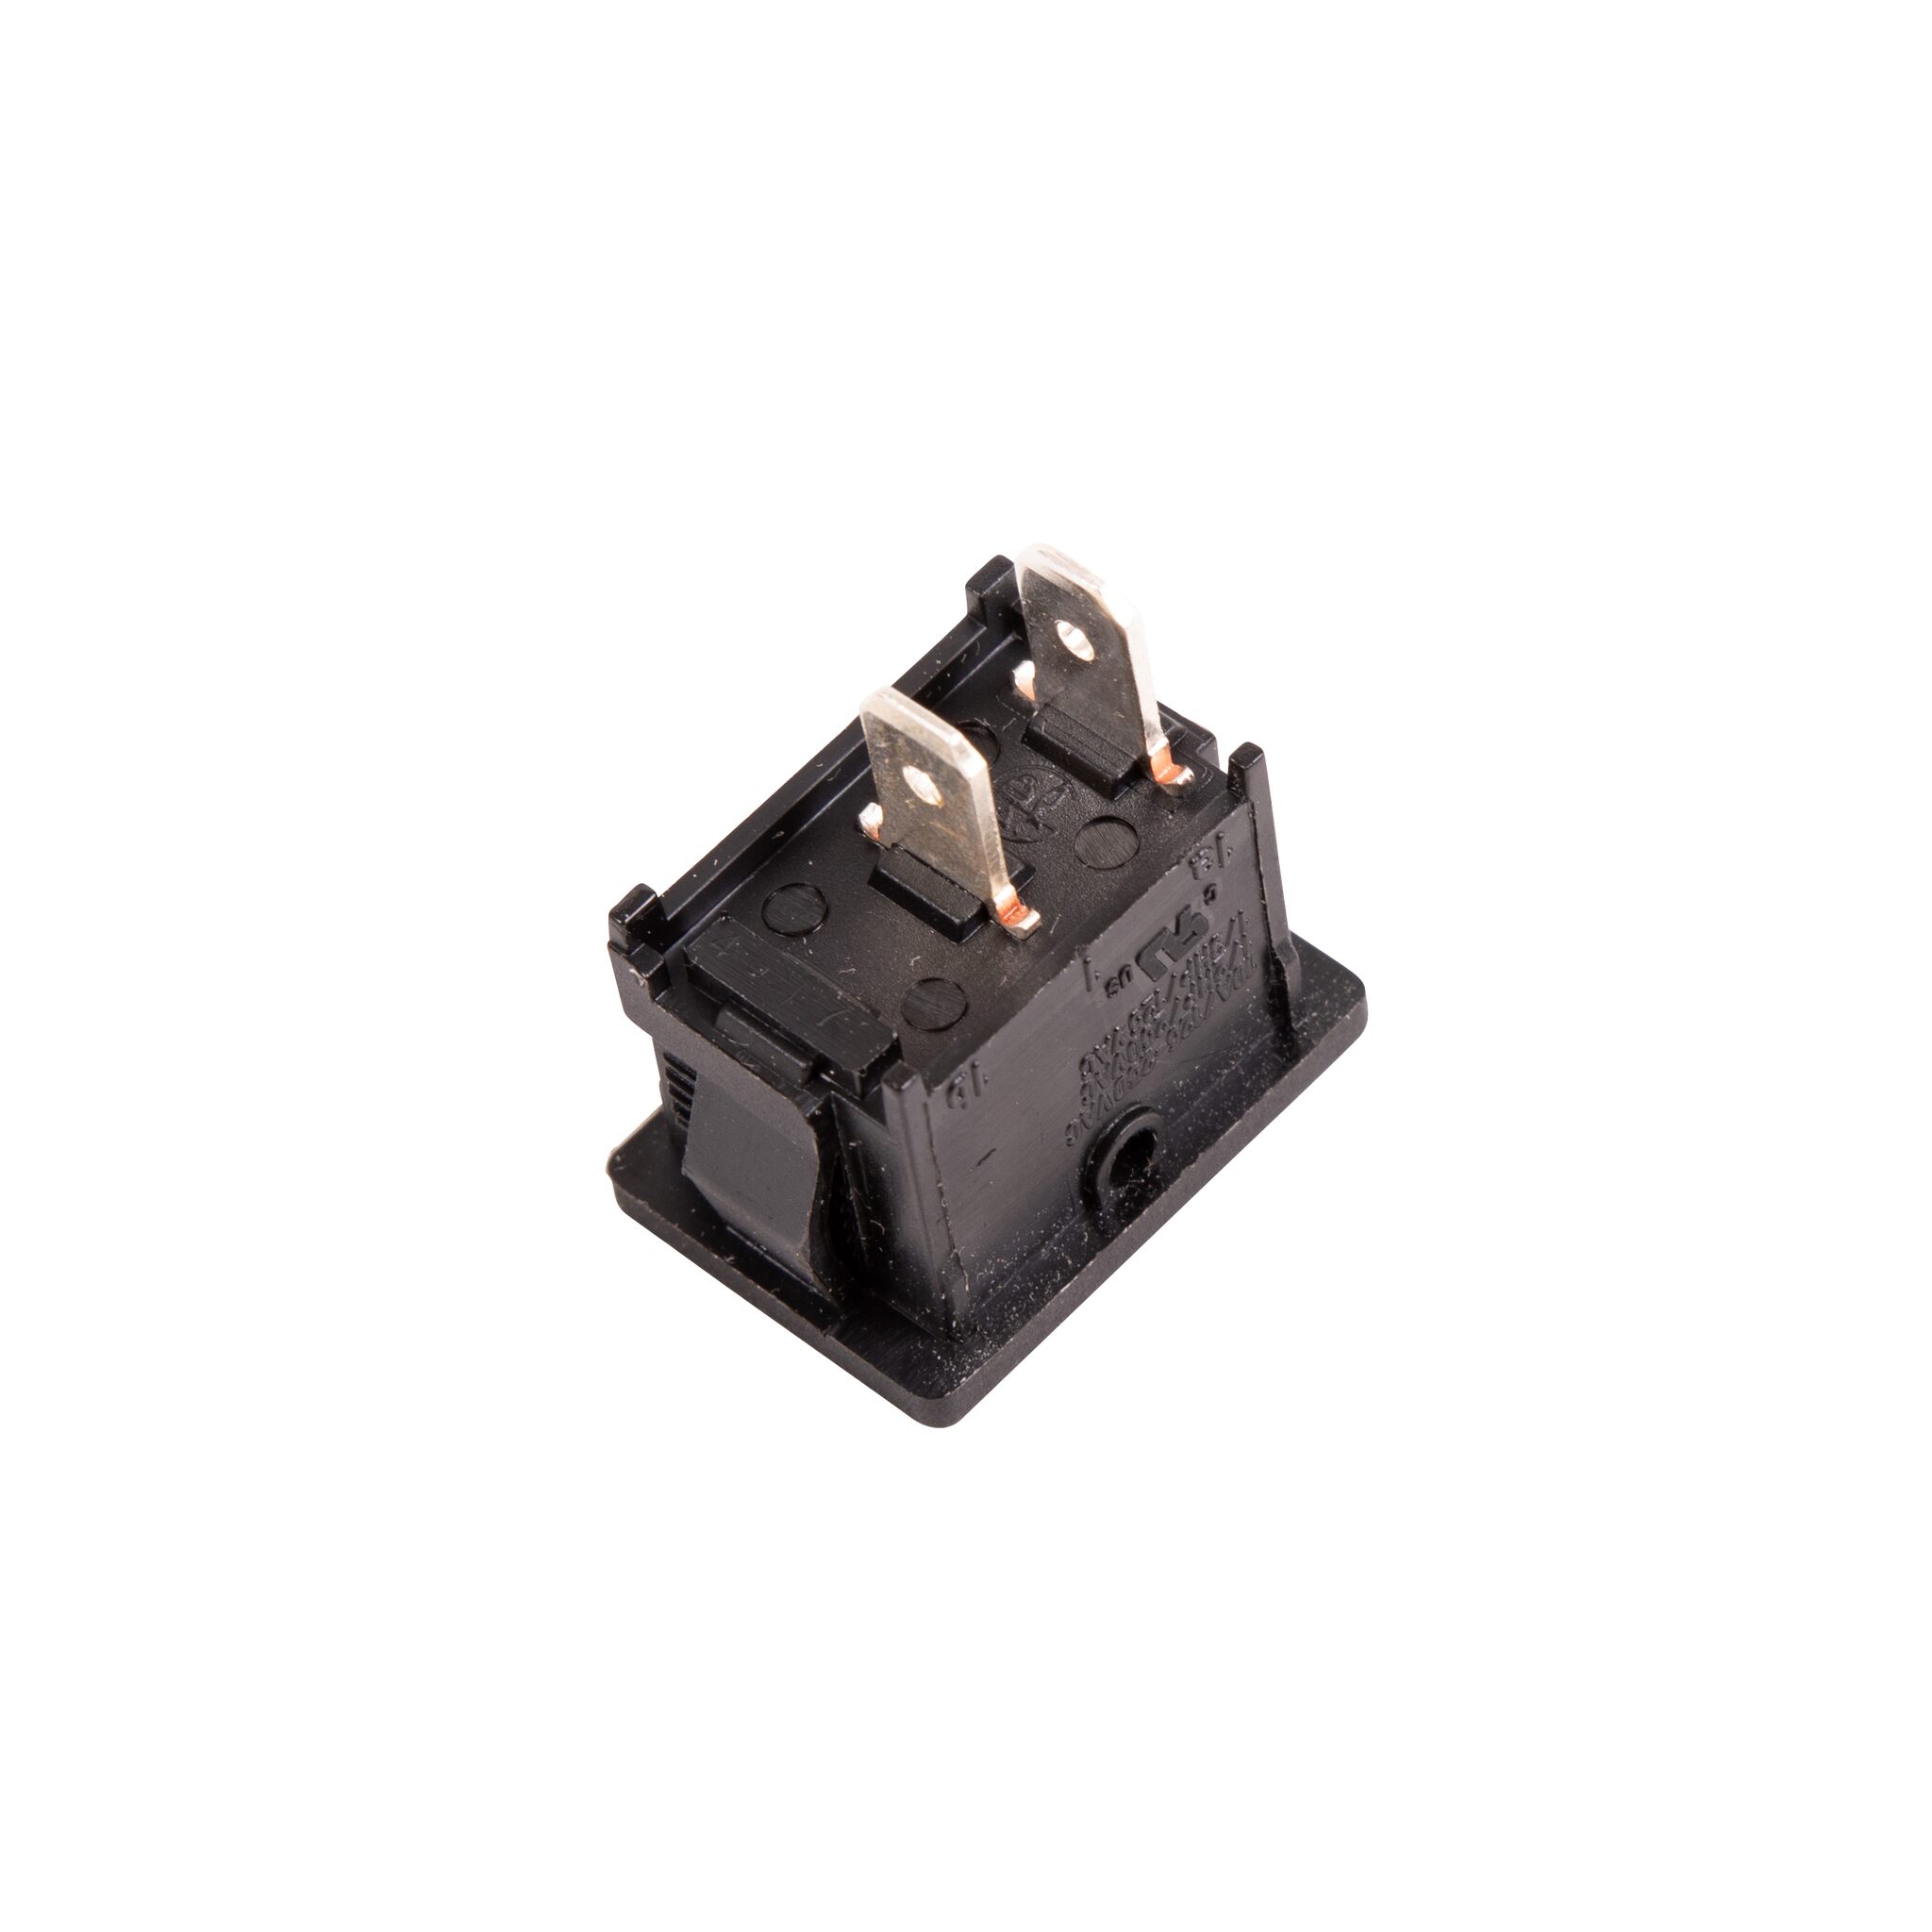 Replacement rocker switch 21 x 15 mm On/Off